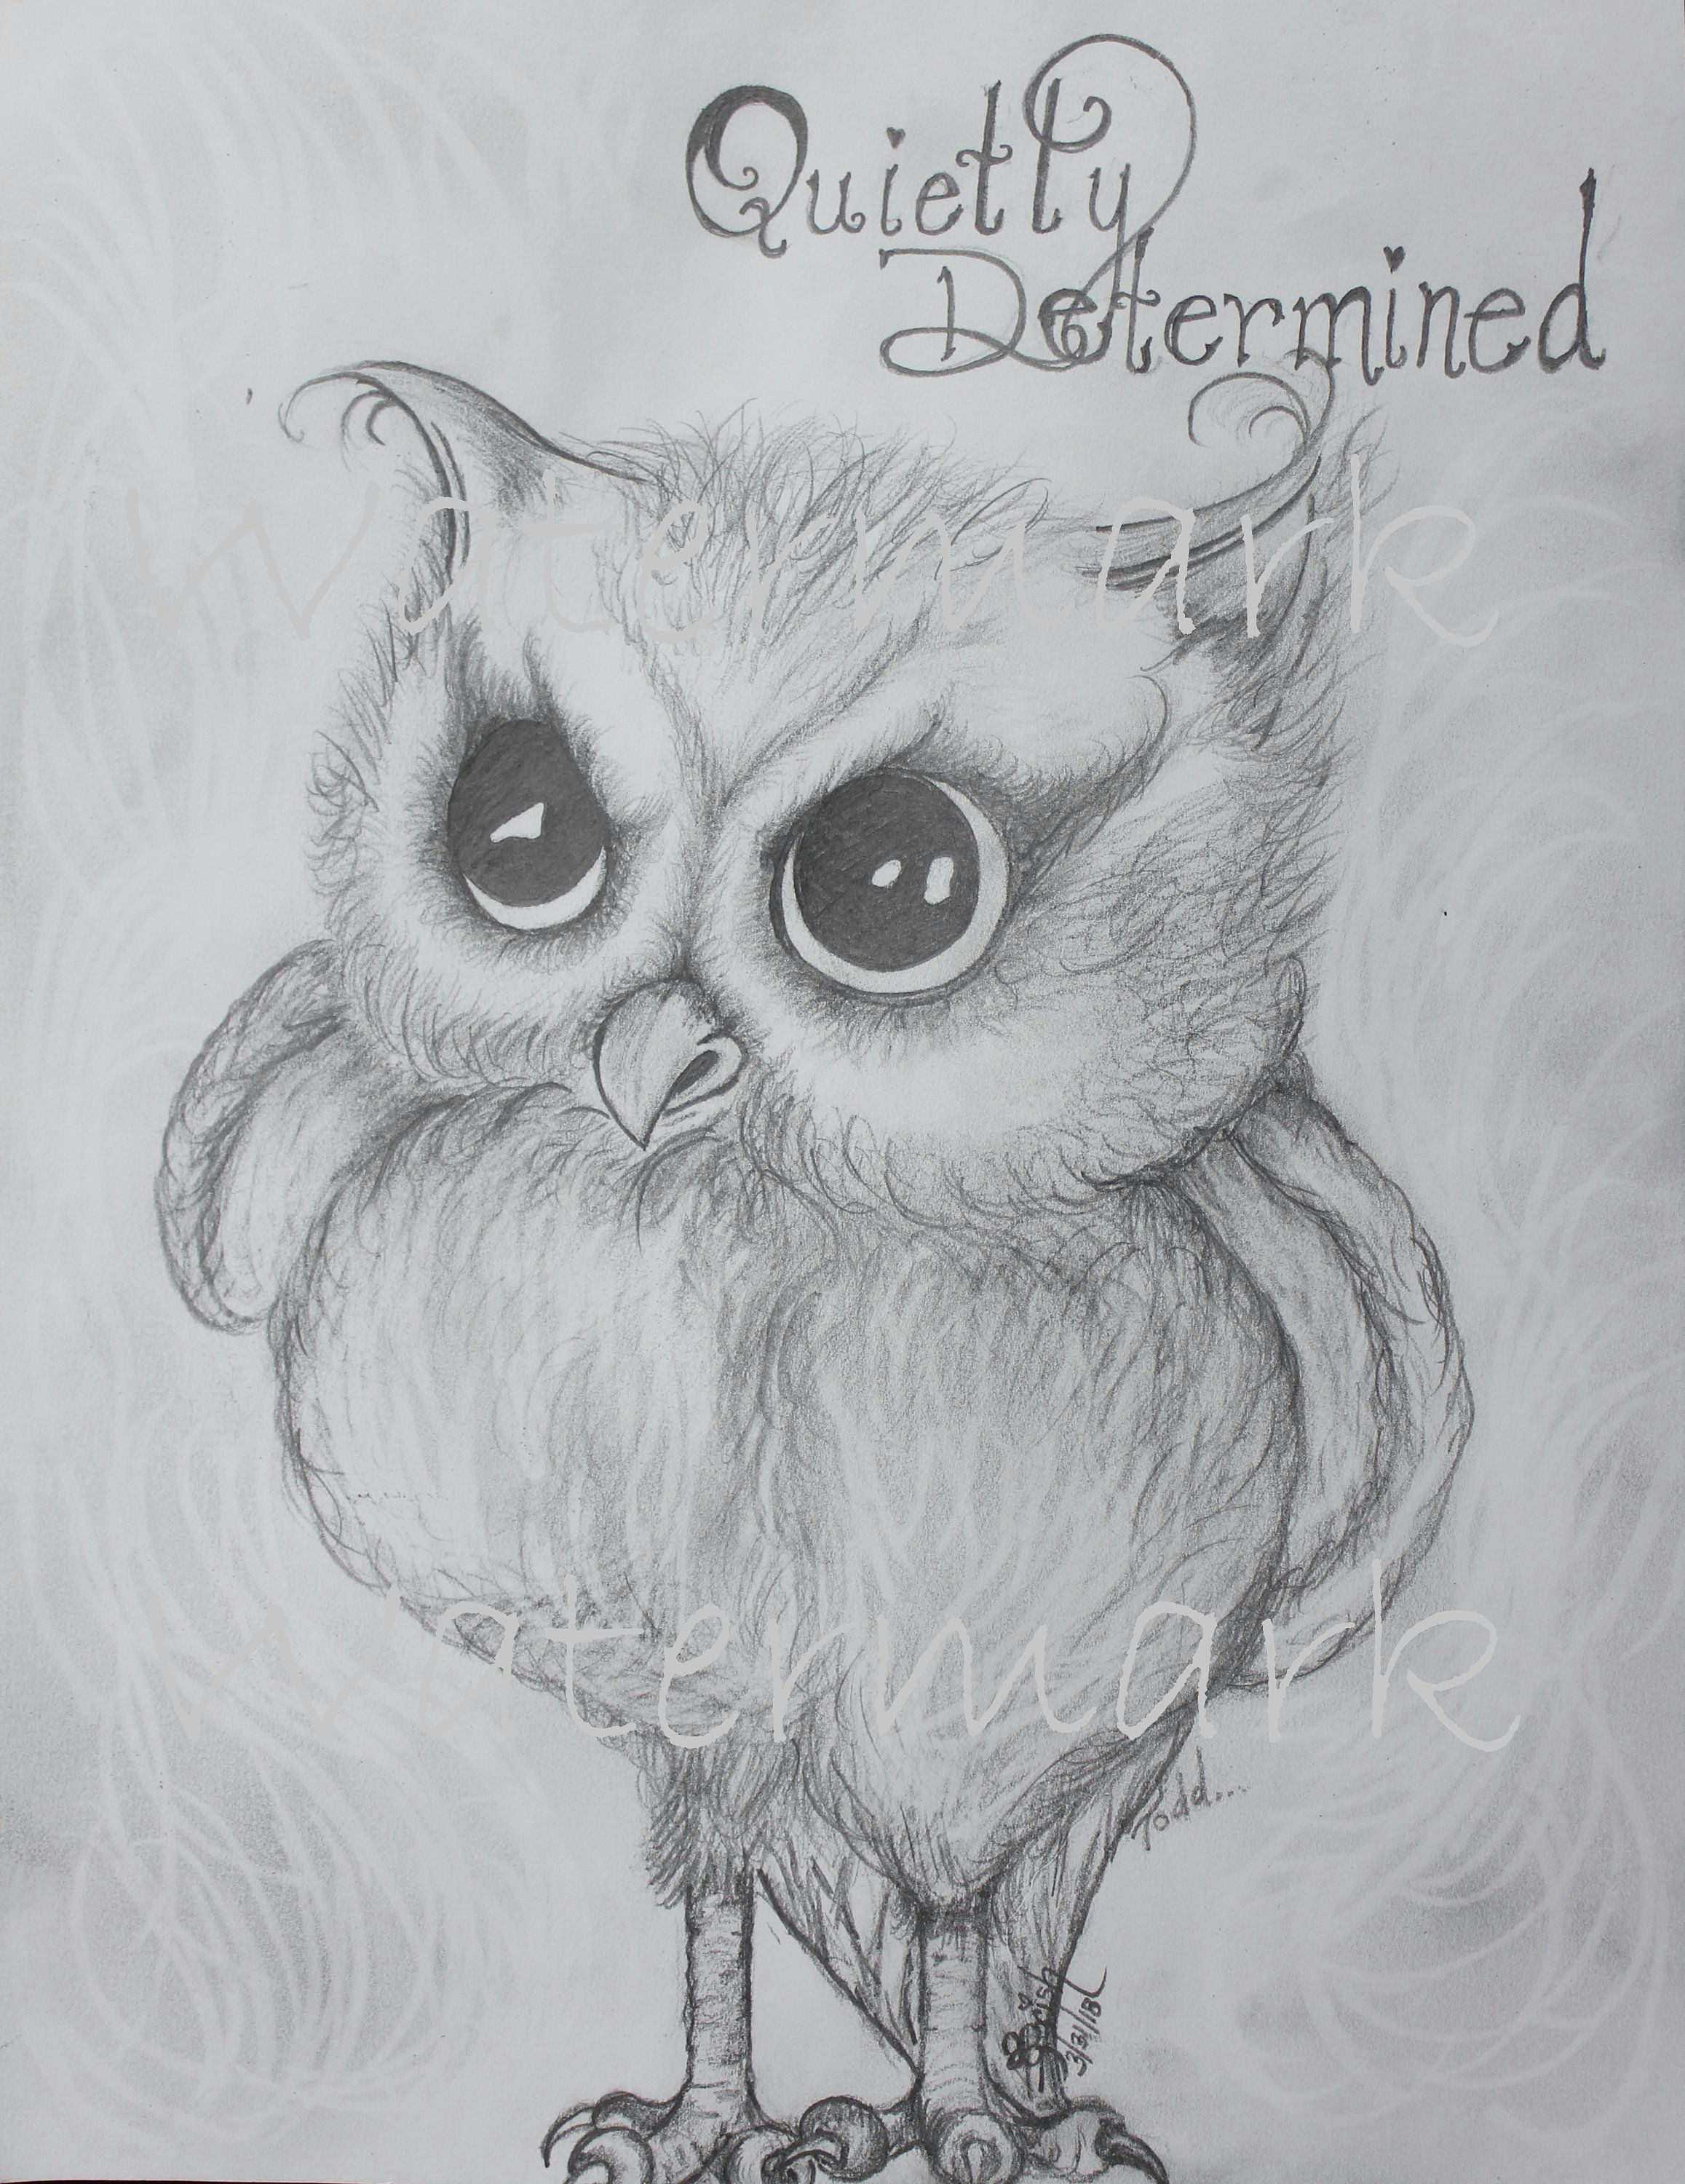 Drawing A Cute Owl Cute Quietly Determined Owl Cute Owl Print Determined Owl Sketch